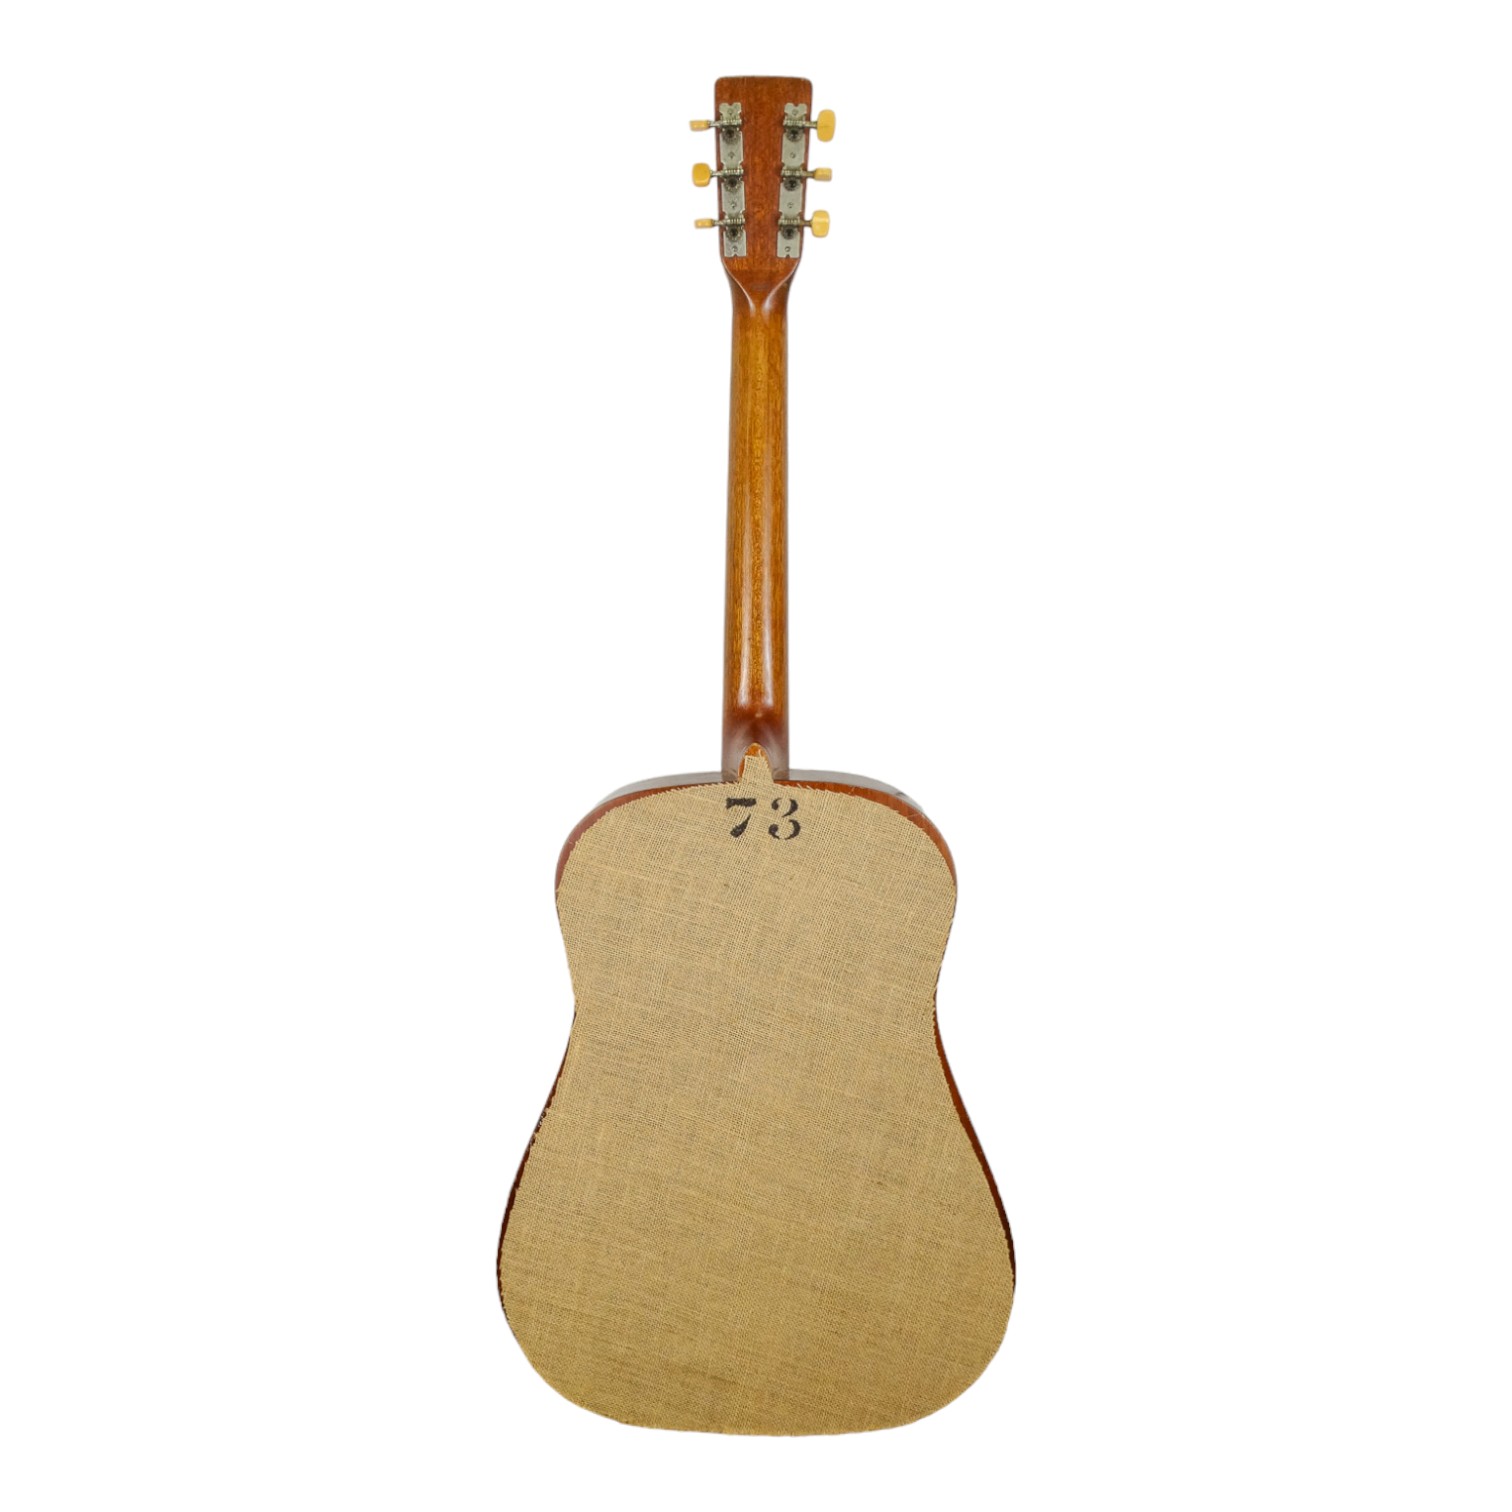 A Hondo II acoustic guitar - with soft case. - Image 7 of 7